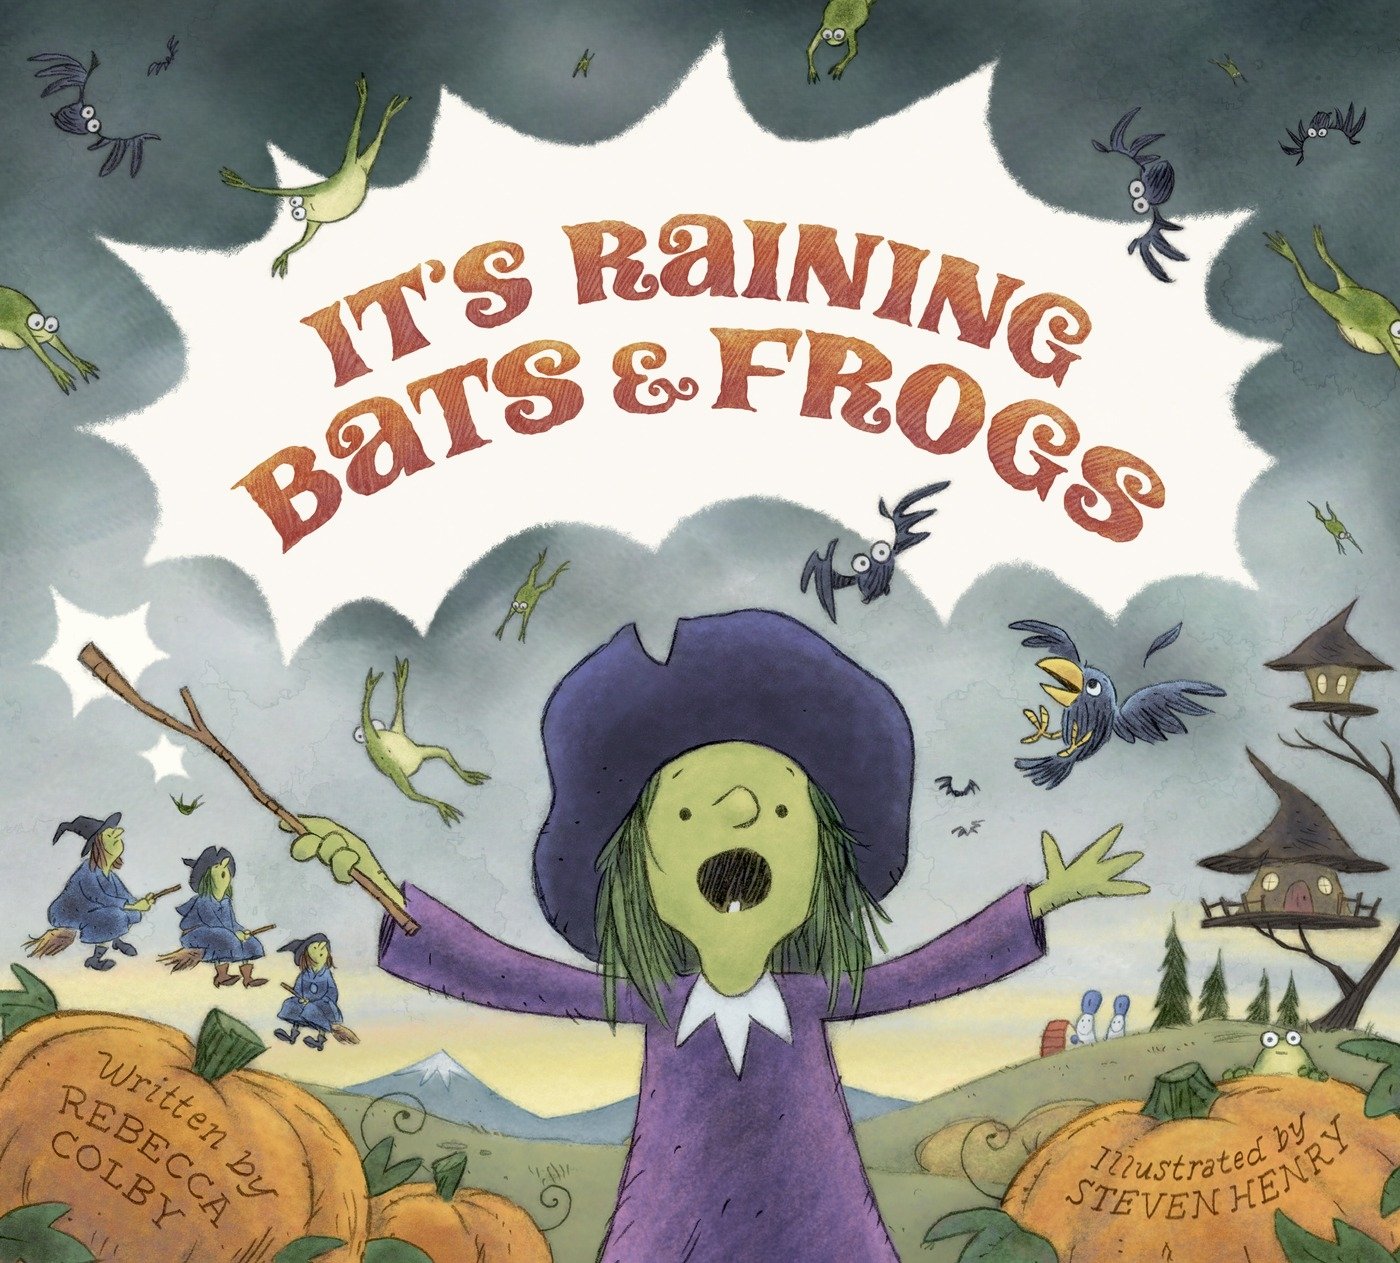 speech and language teaching concepts for Its Raining Bats and Frogs in speech therapy